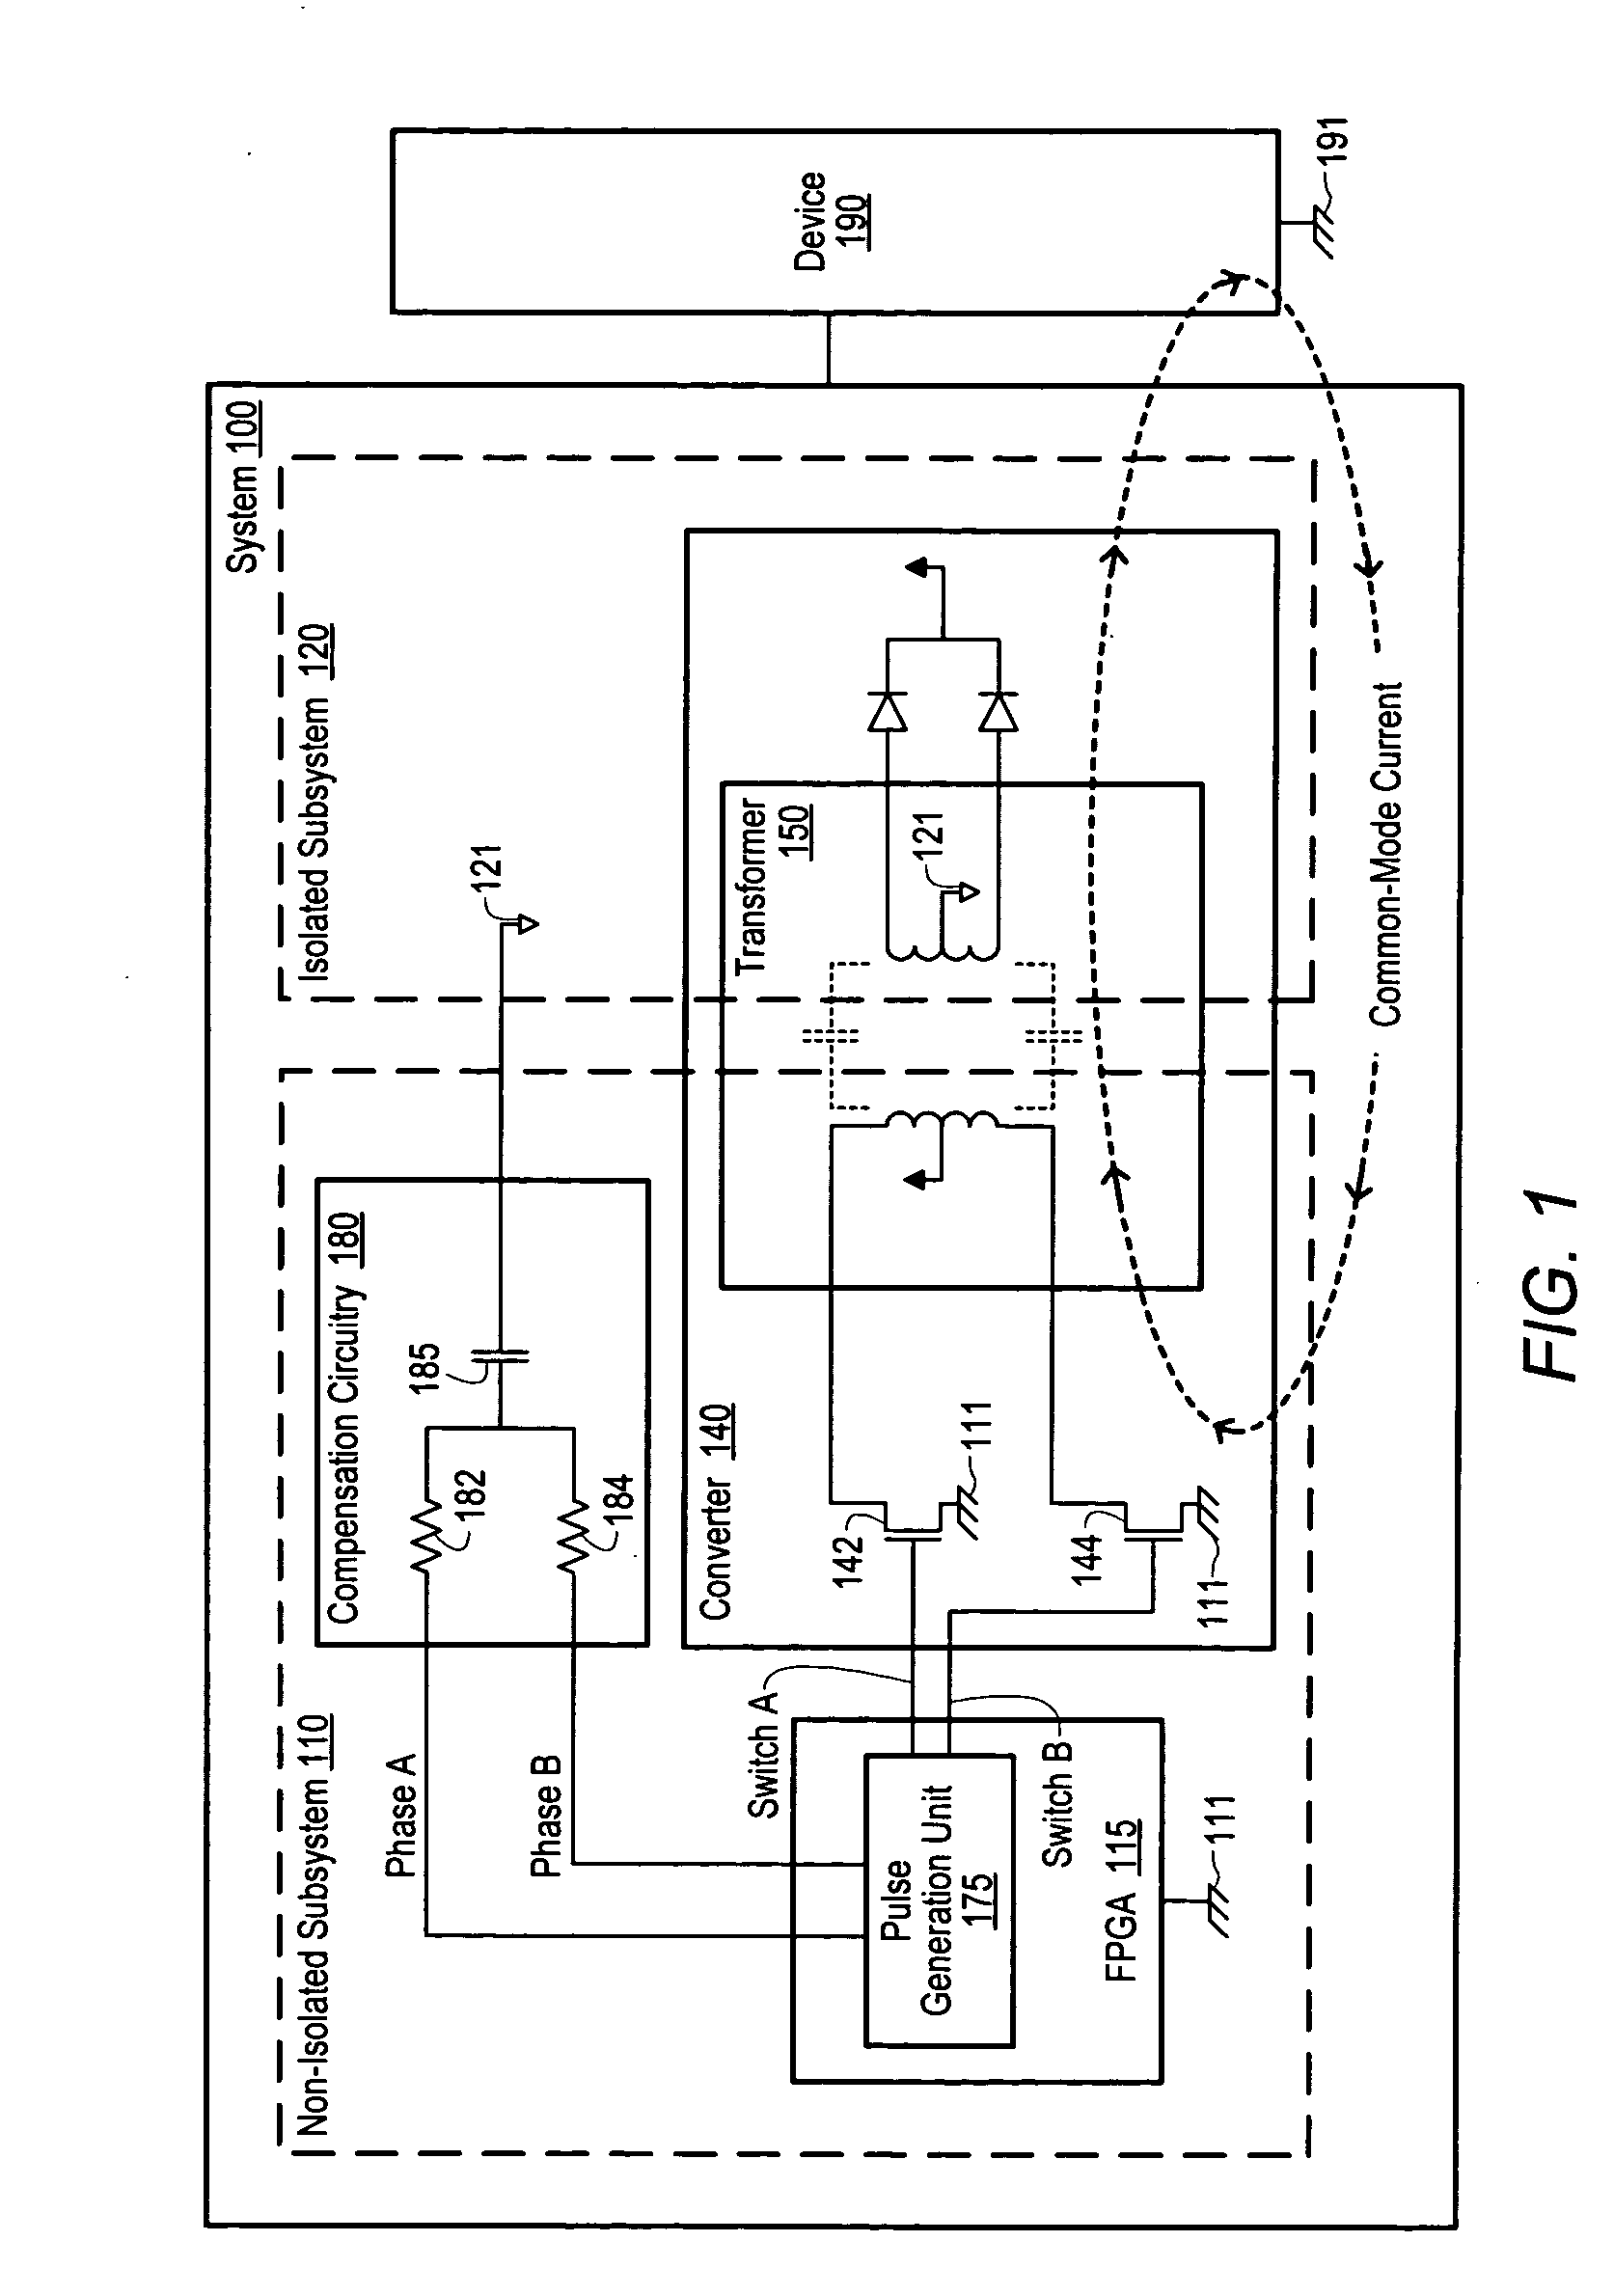 Common-mode current cancellation with digital pulses for isolated applications